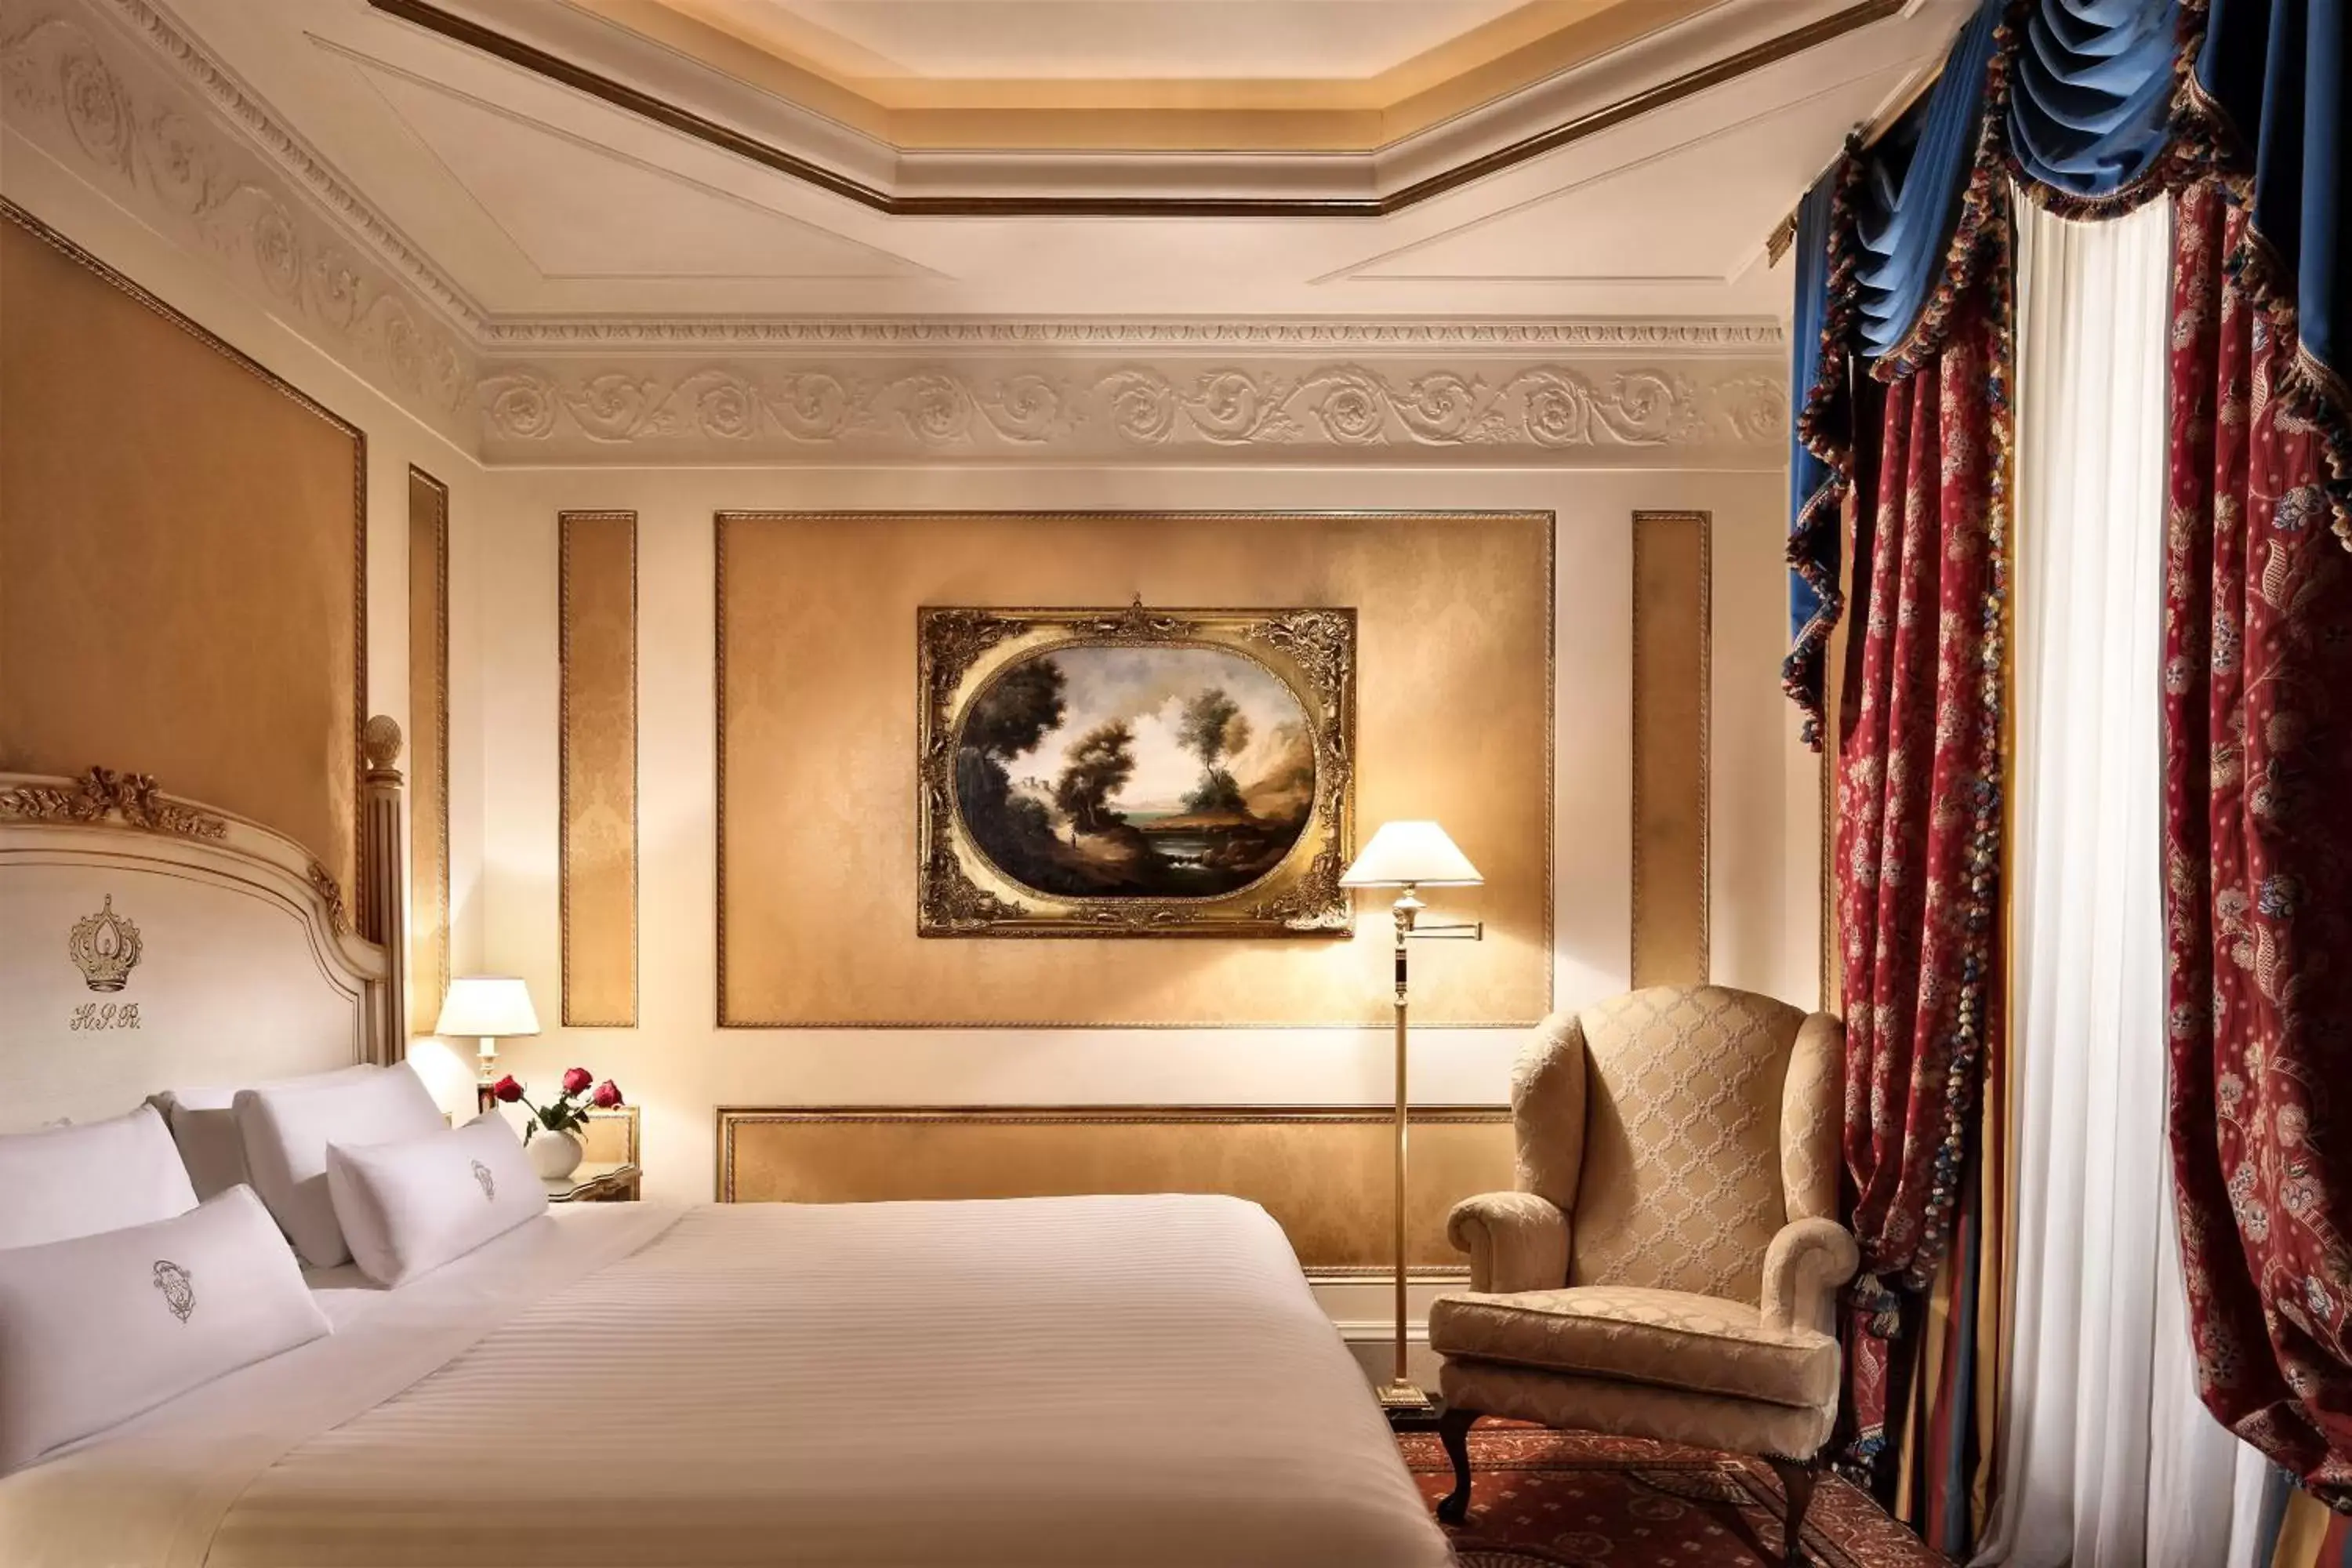  Superior Room in Hotel Splendide Royal - The Leading Hotels of the World